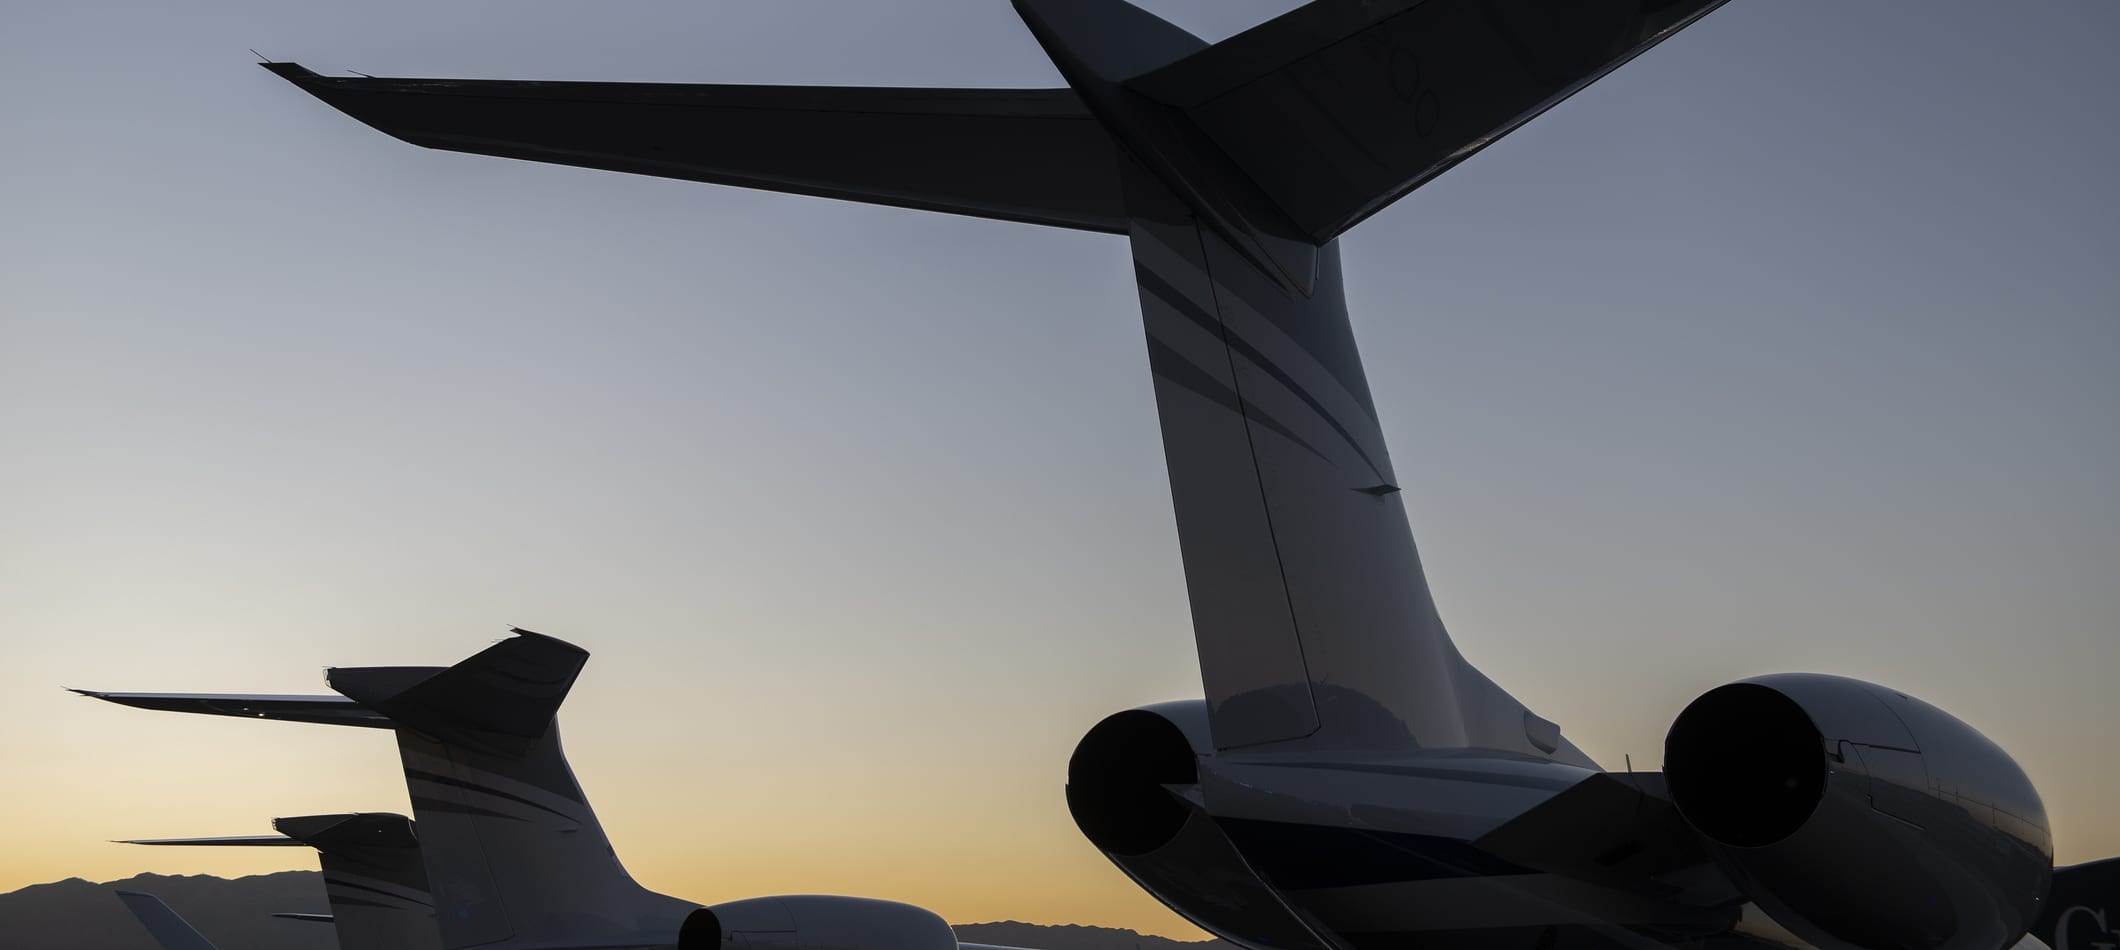 Tail section of Gulfstream Jets at sunset; learn about distressed air carriers